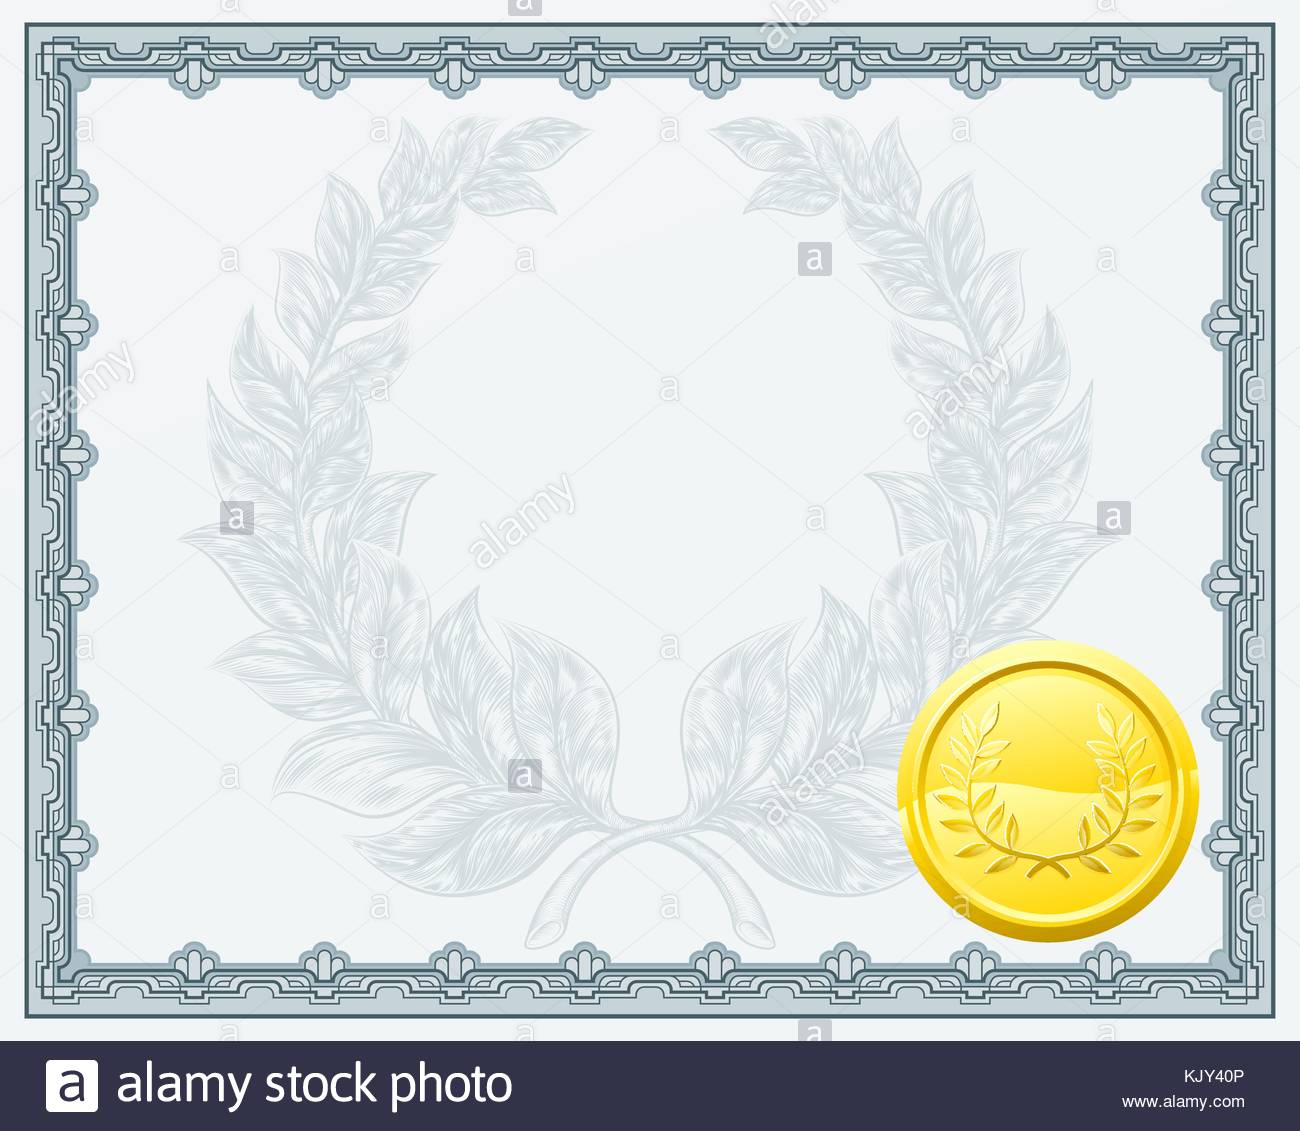 Certificate Diploma Background Template Stock Vector Art